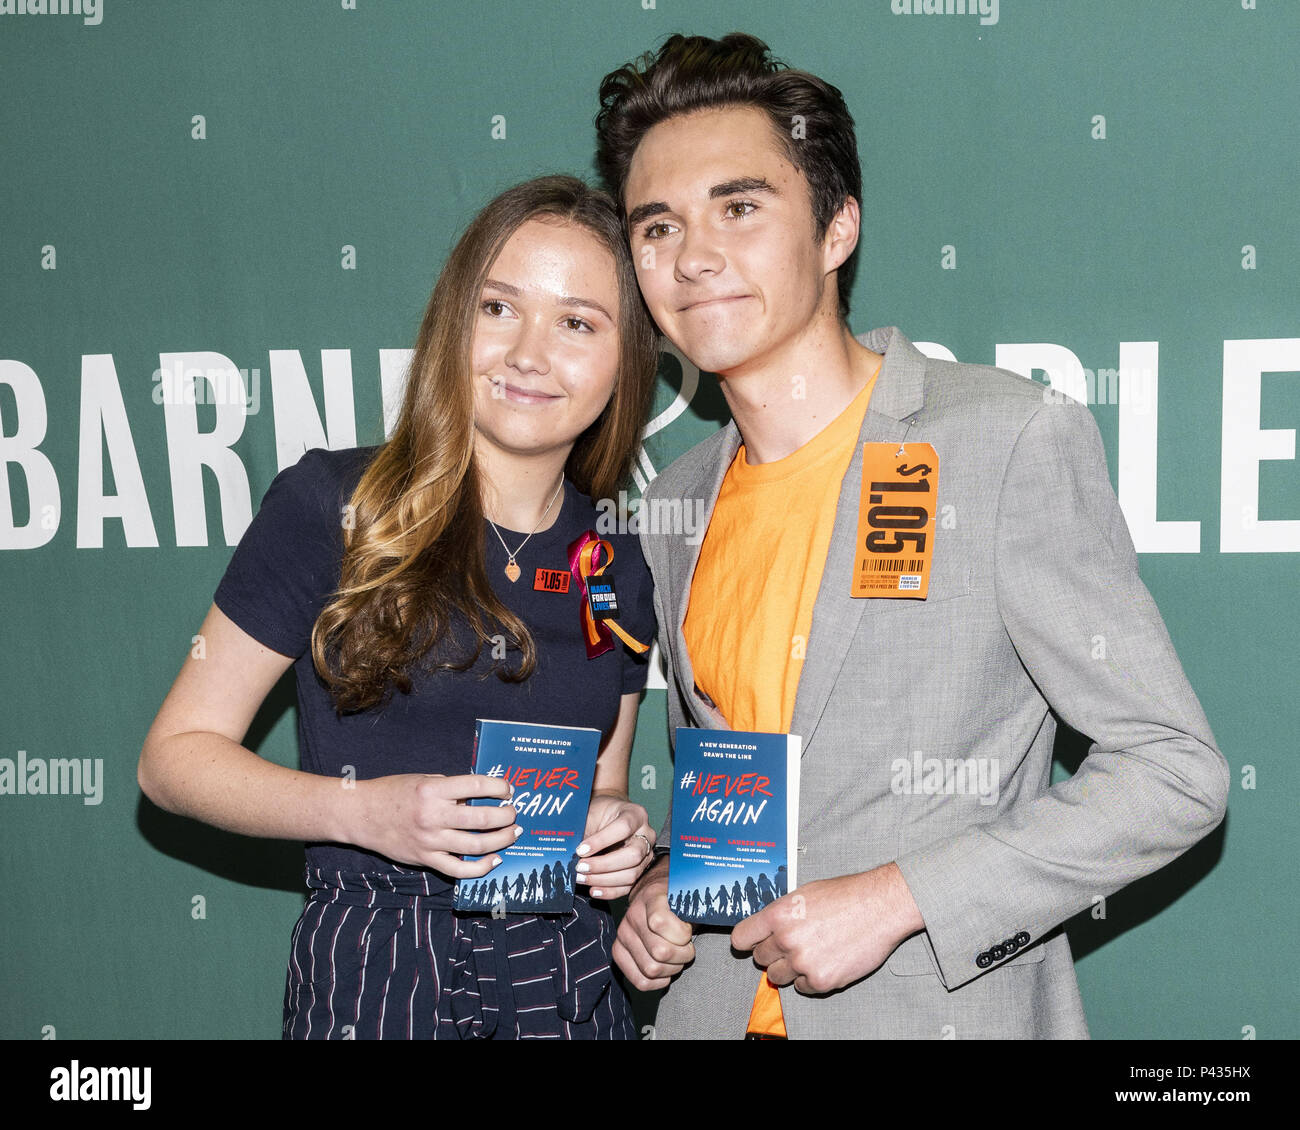 New York, NY, USA. 20th June, 2018. DAVID HOGG, recent graduate of Marjory Stoneman Douglas High School in Parkland, Florida and LAUREN HOGG, co-author with David of #NeverAgain: A New Generation Draws the Line, at the Barnes & Noble book store in Union Square in New York City on June 20, 2018 Credit: Michael Brochstein/ZUMA Wire/Alamy Live News Stock Photo